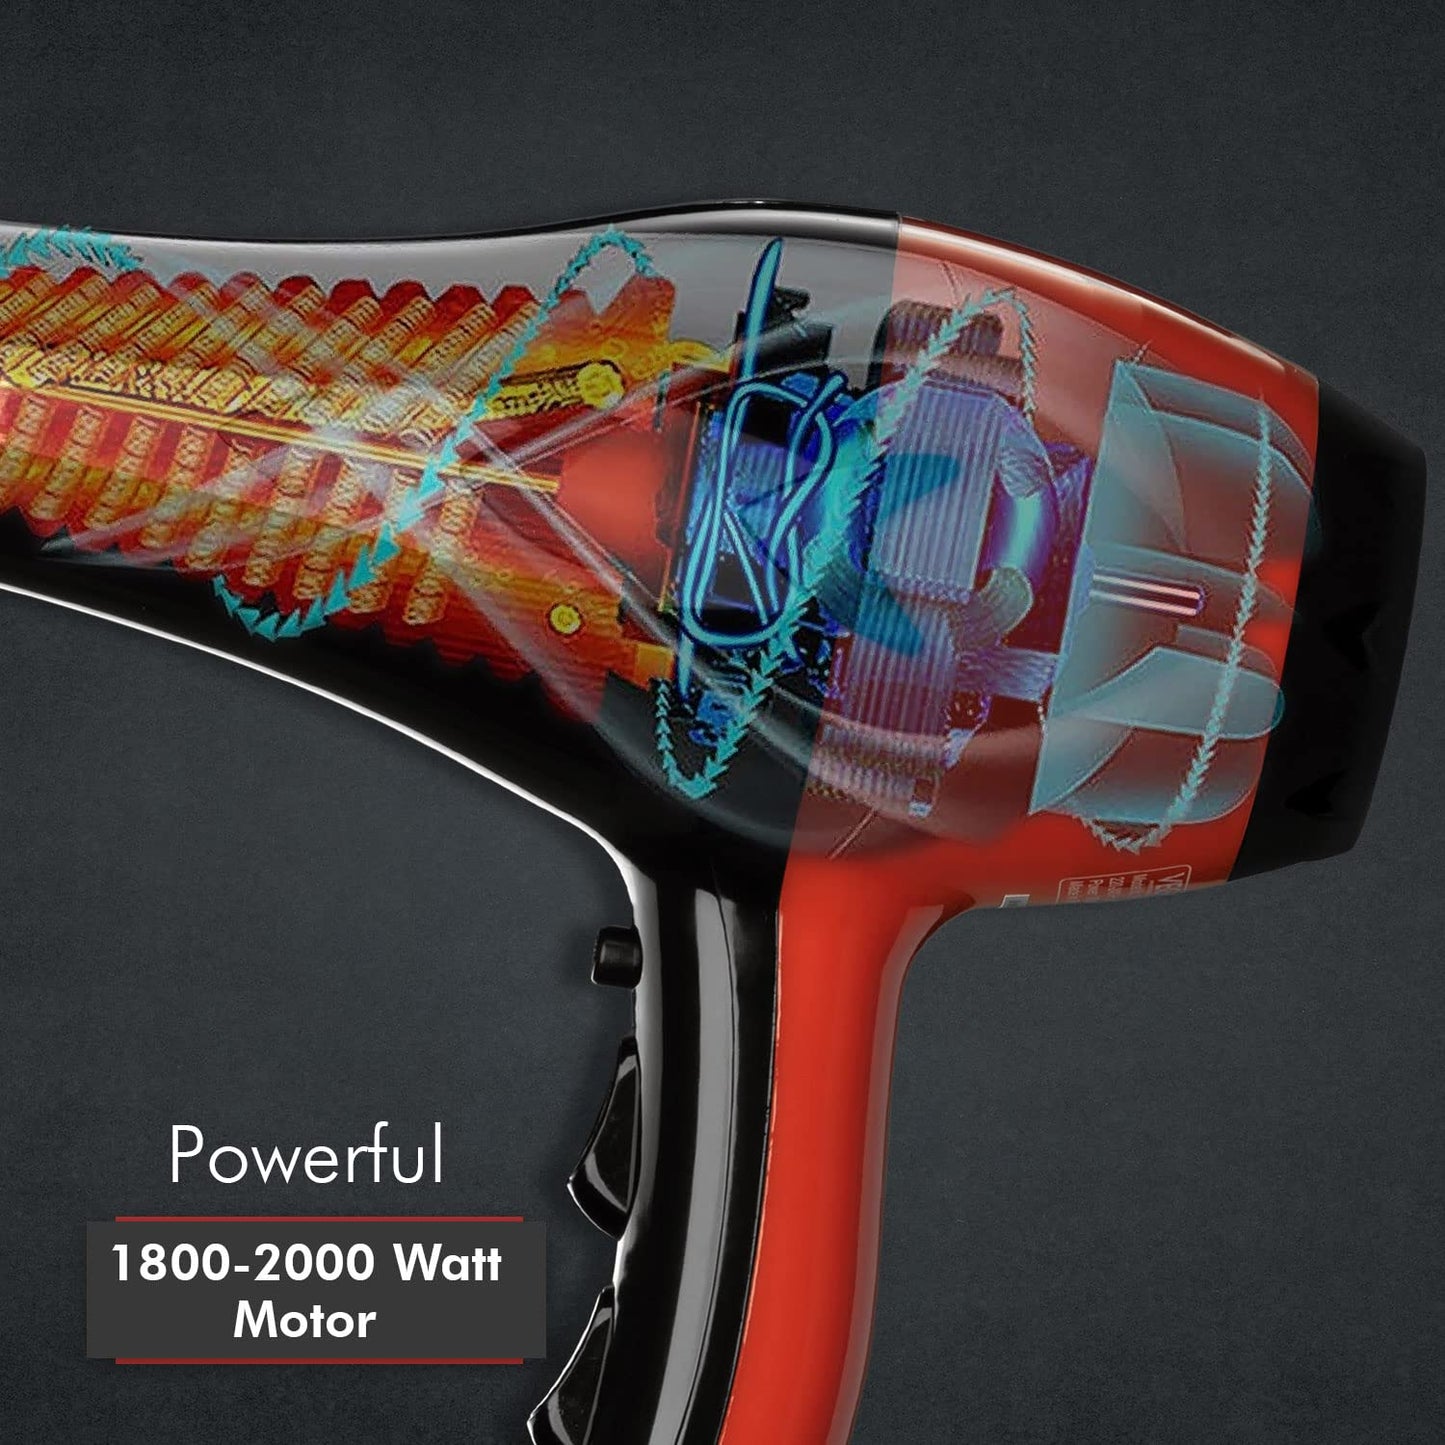 VEGA Professional Pro Dry 1800-2000W Hair Dryer for Men & Women with Cool Shot Button and 3 Heat & 2 Speed Settings, Red, (VPVHD-07)